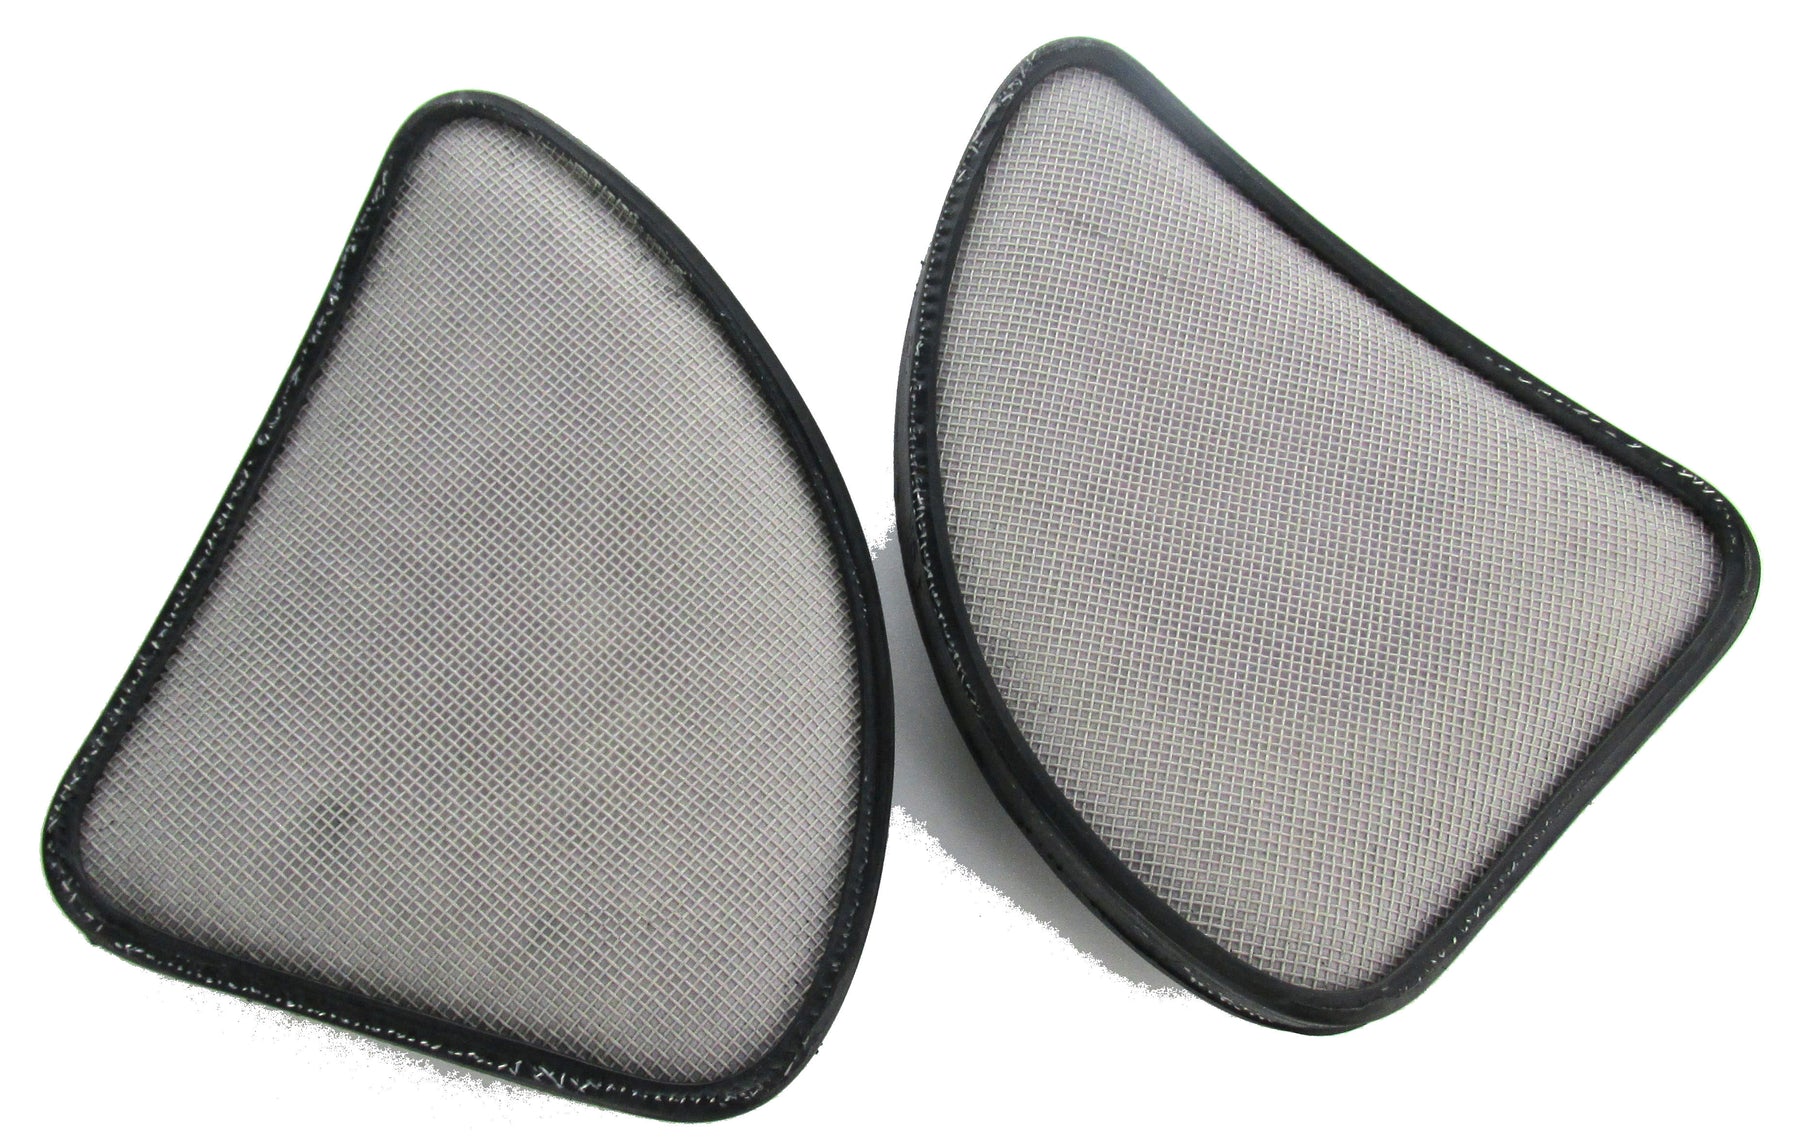 Czech Gas Mask Filter for M10 / M10M - 2 PACK